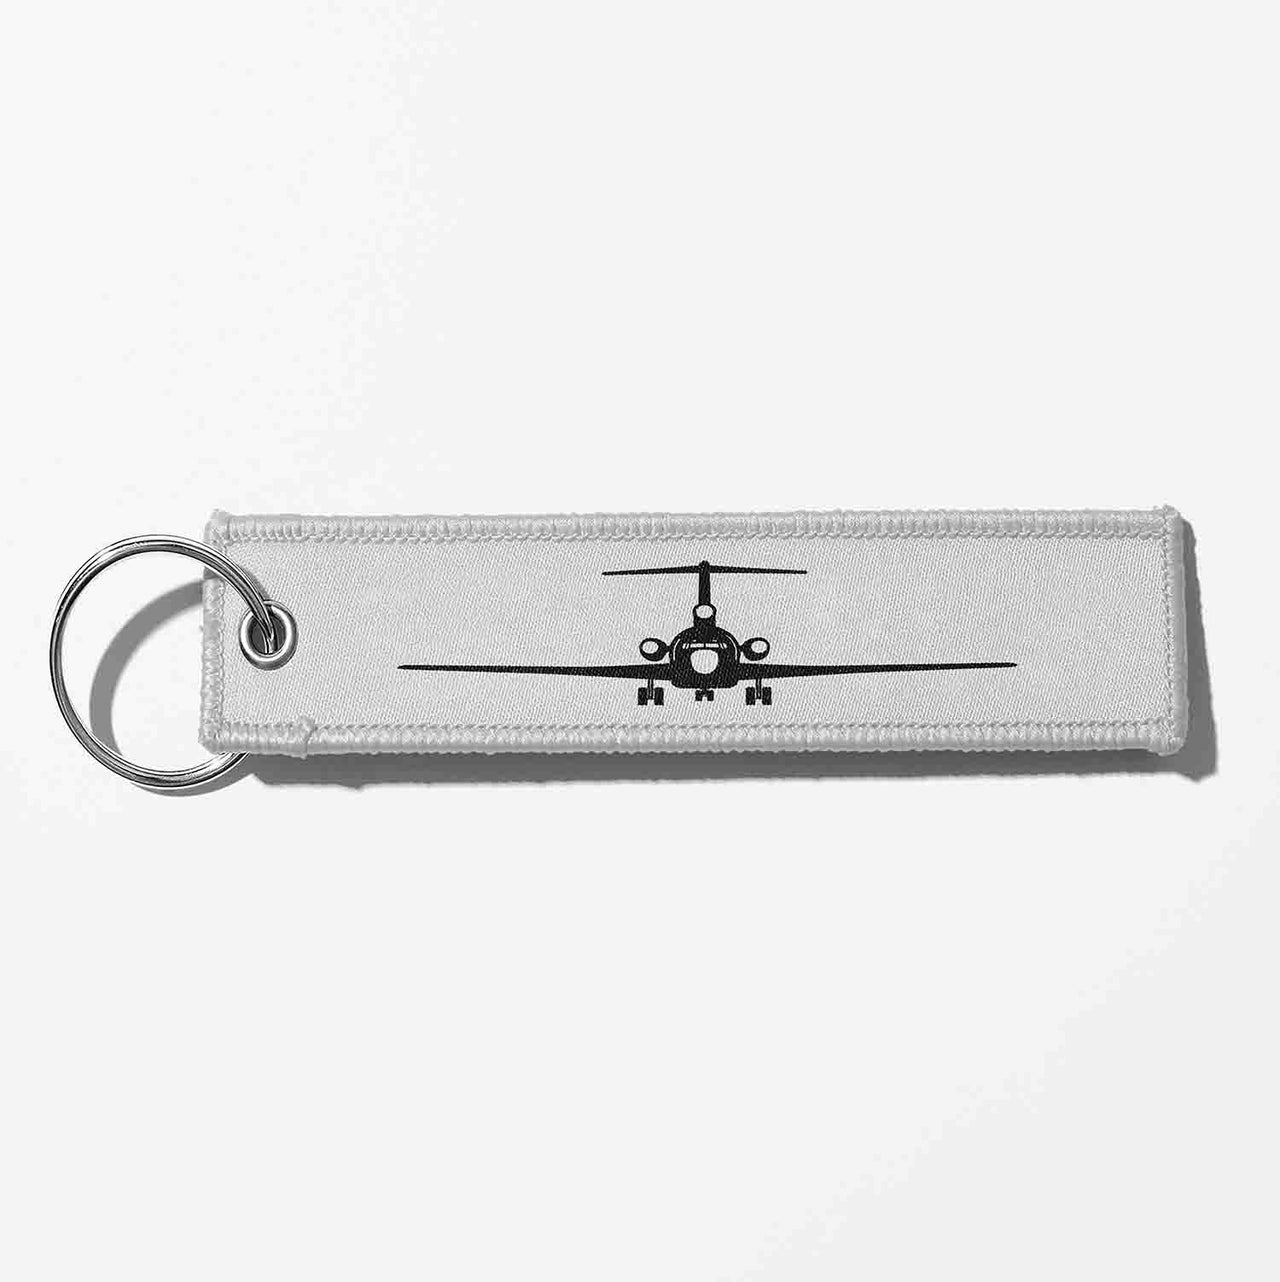 Boeing 727 Silhouette Designed Key Chains